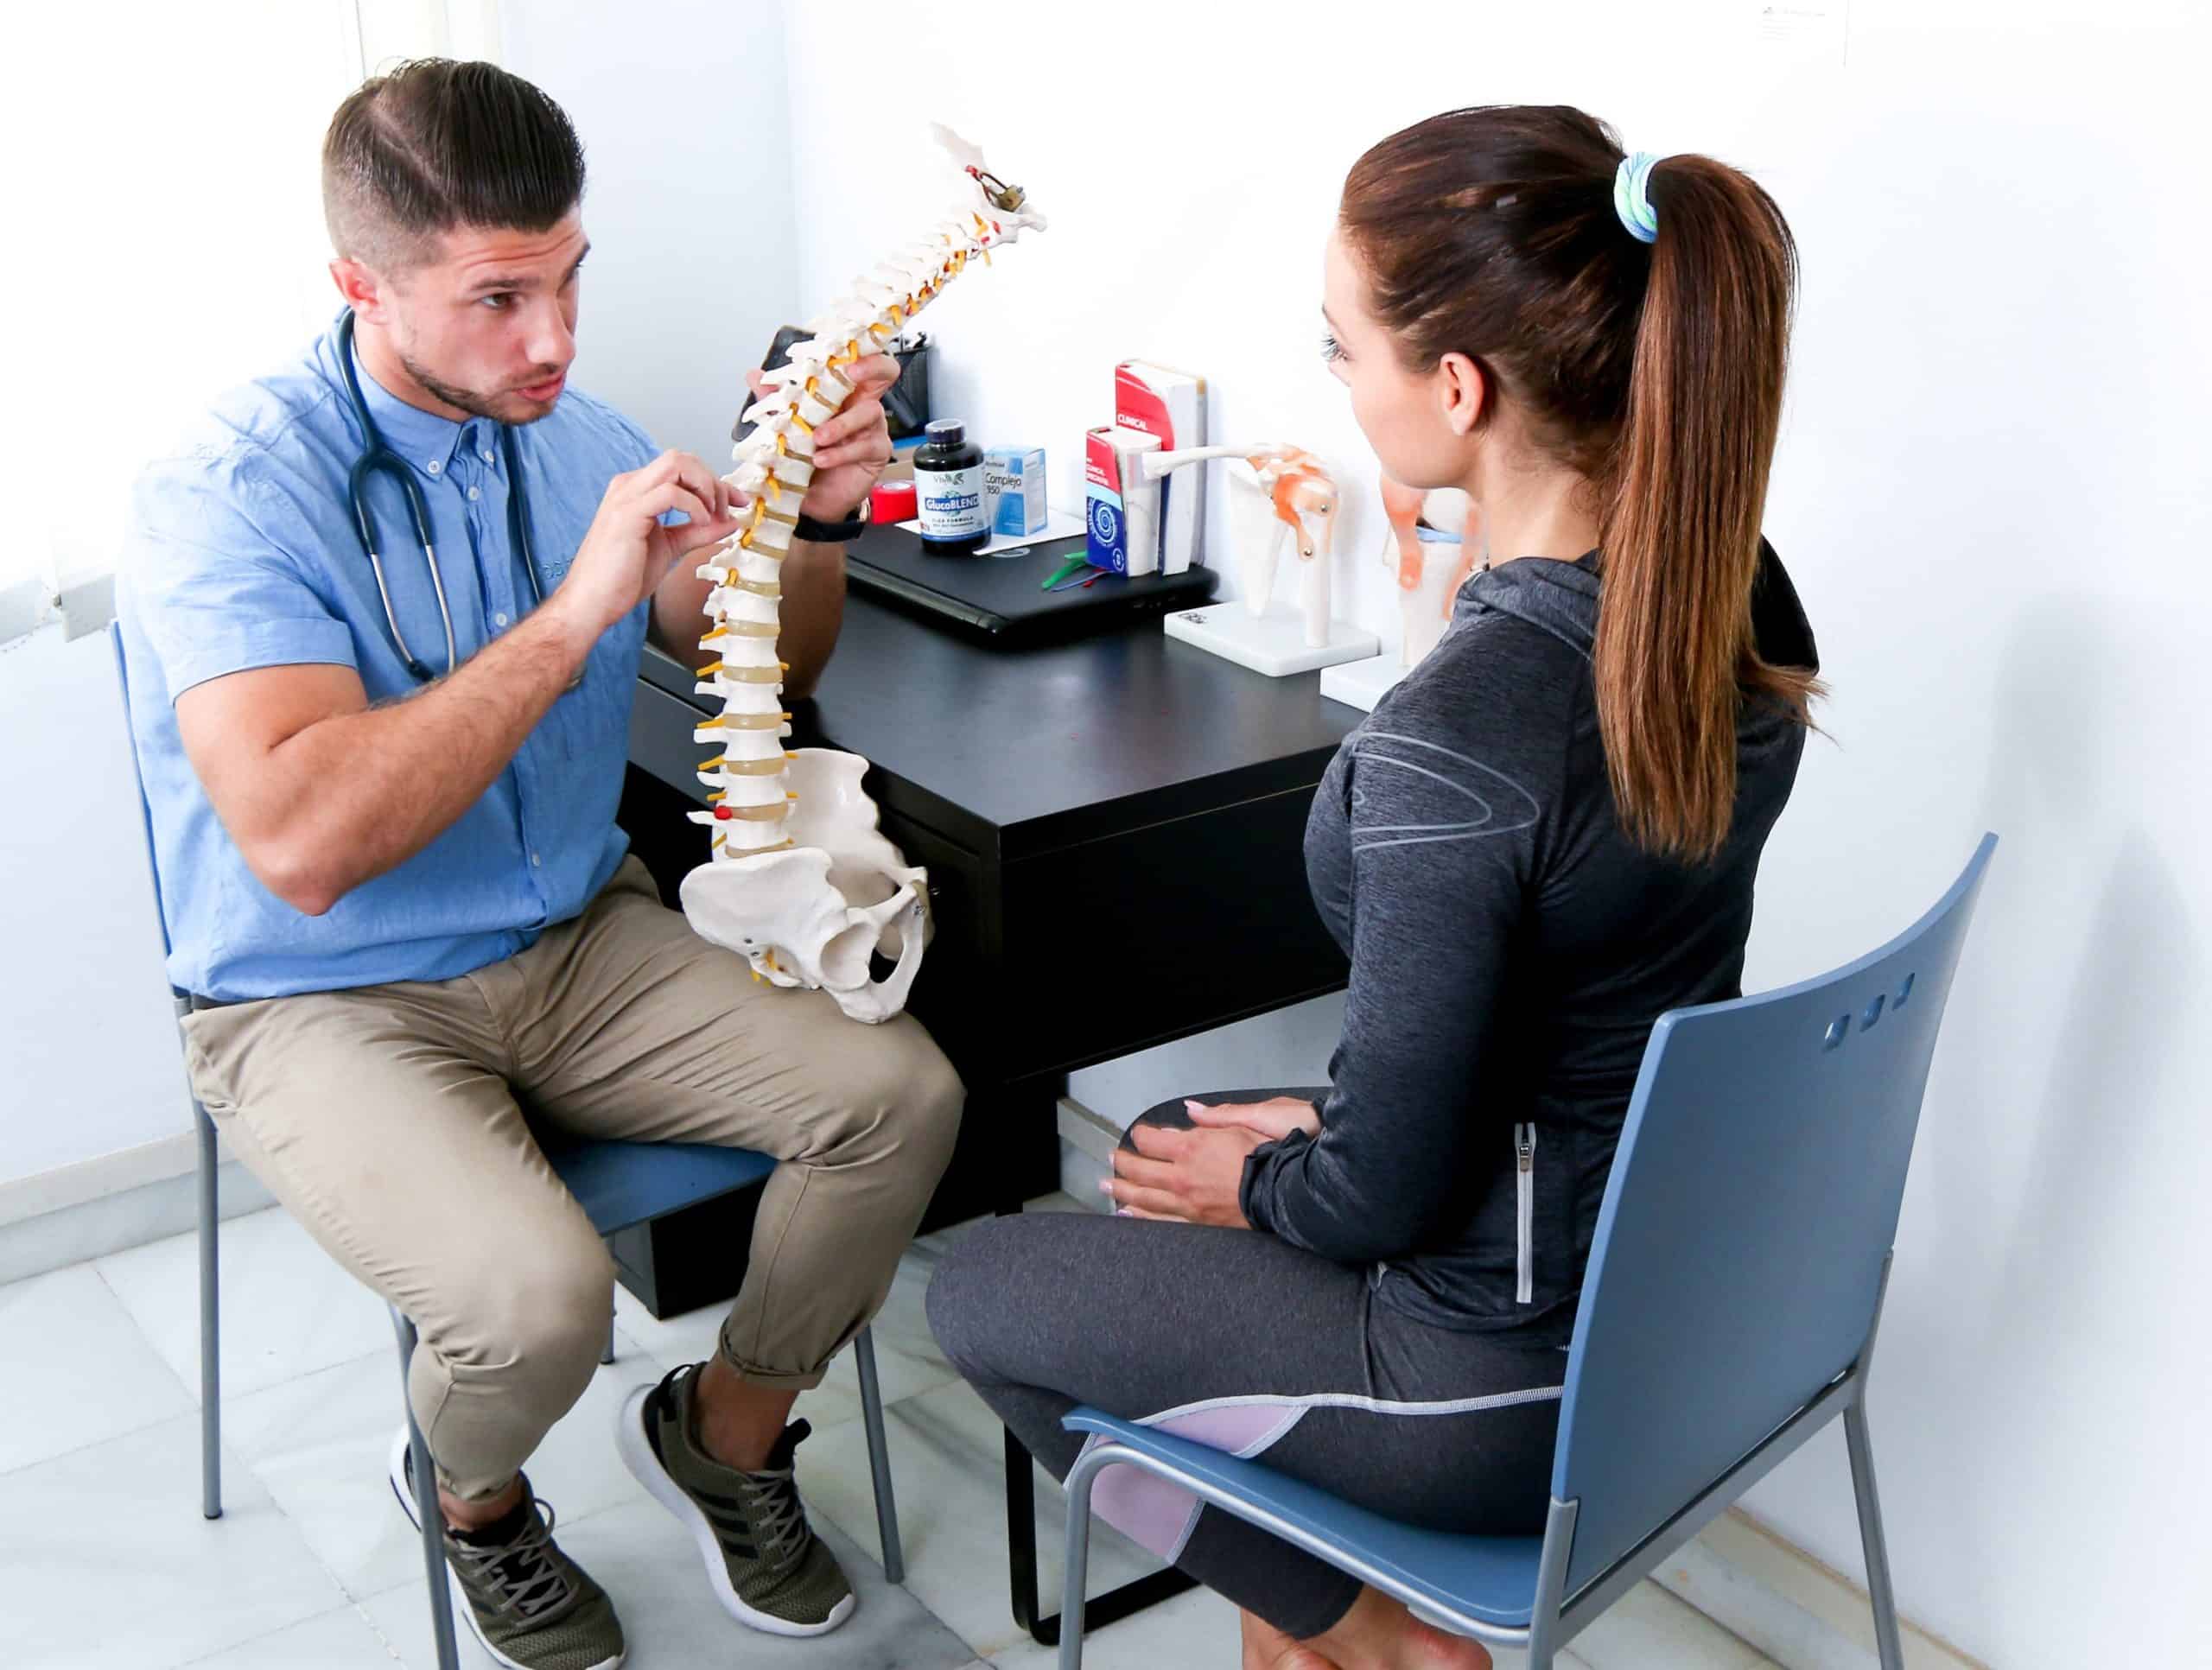 Learning About Marbella's Chiropractors, Sports Massage Therapists, and More